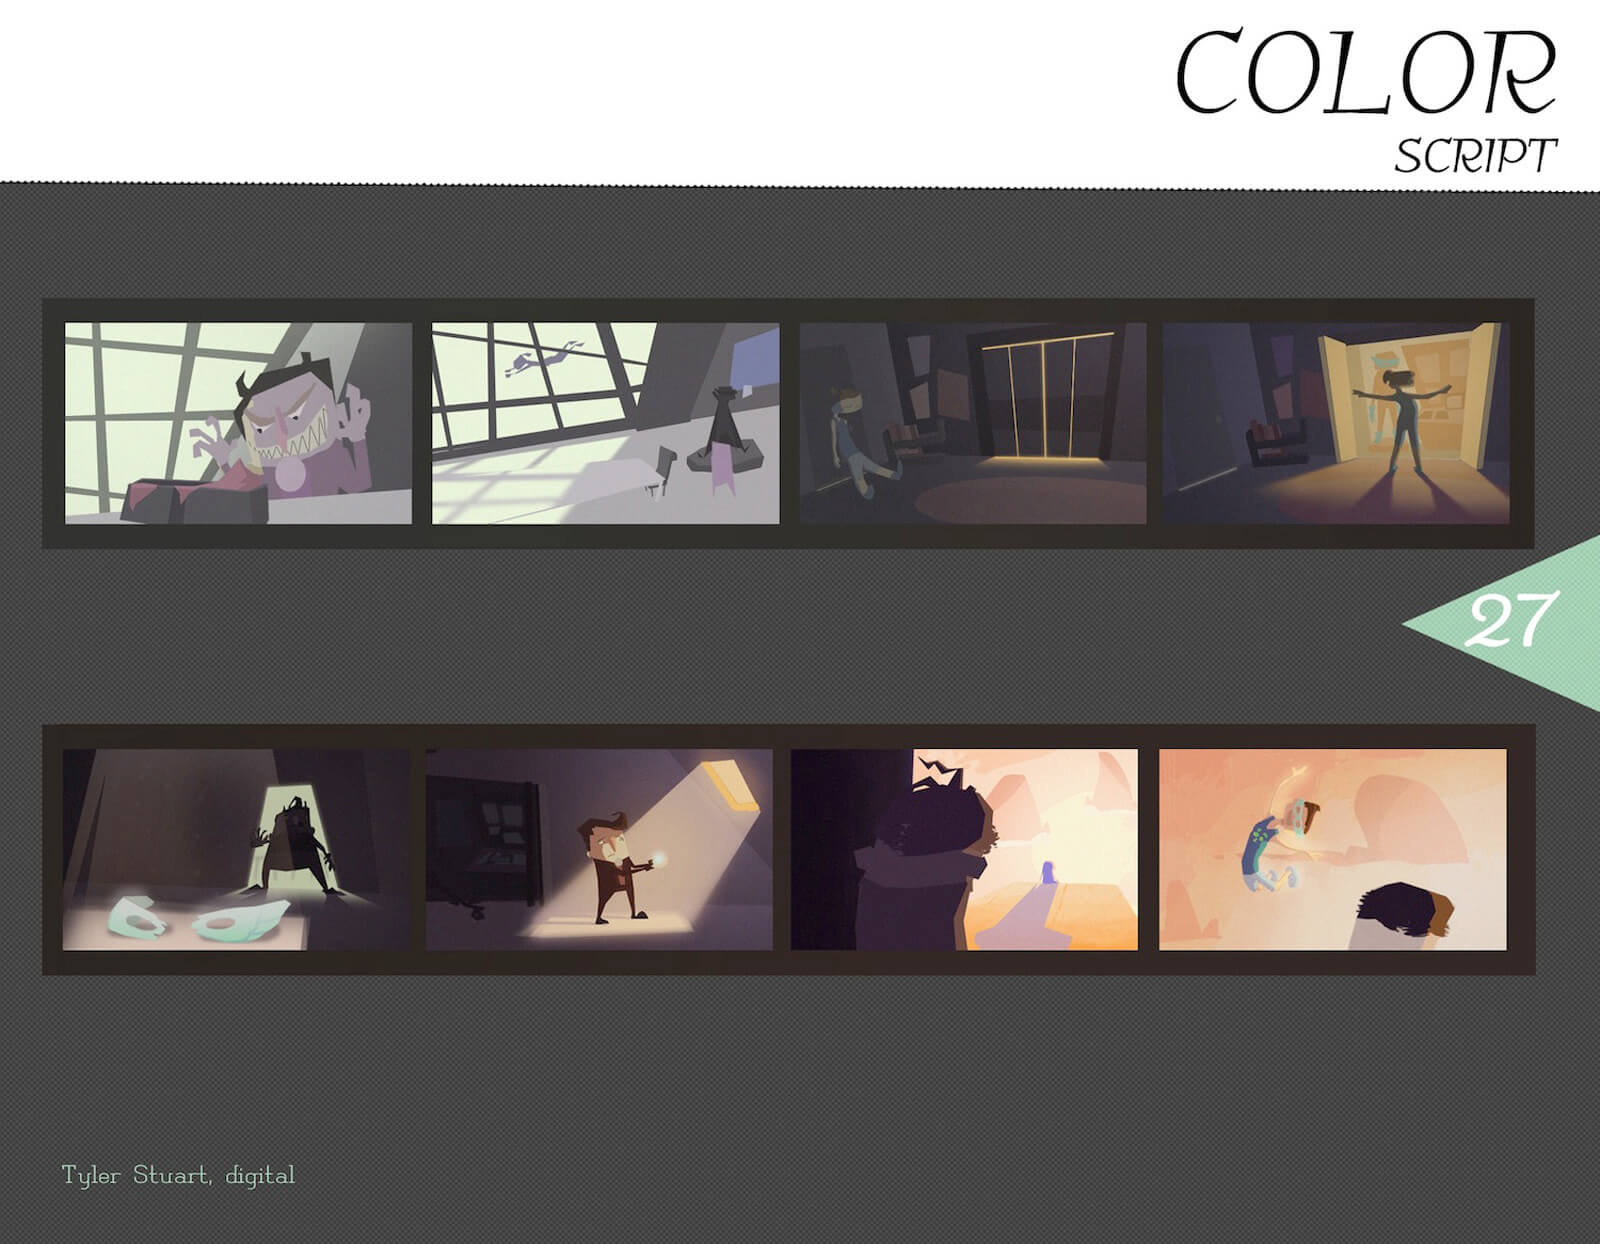 Color Script for the film Super Secret depicting 8 frames of the story from beginning to end